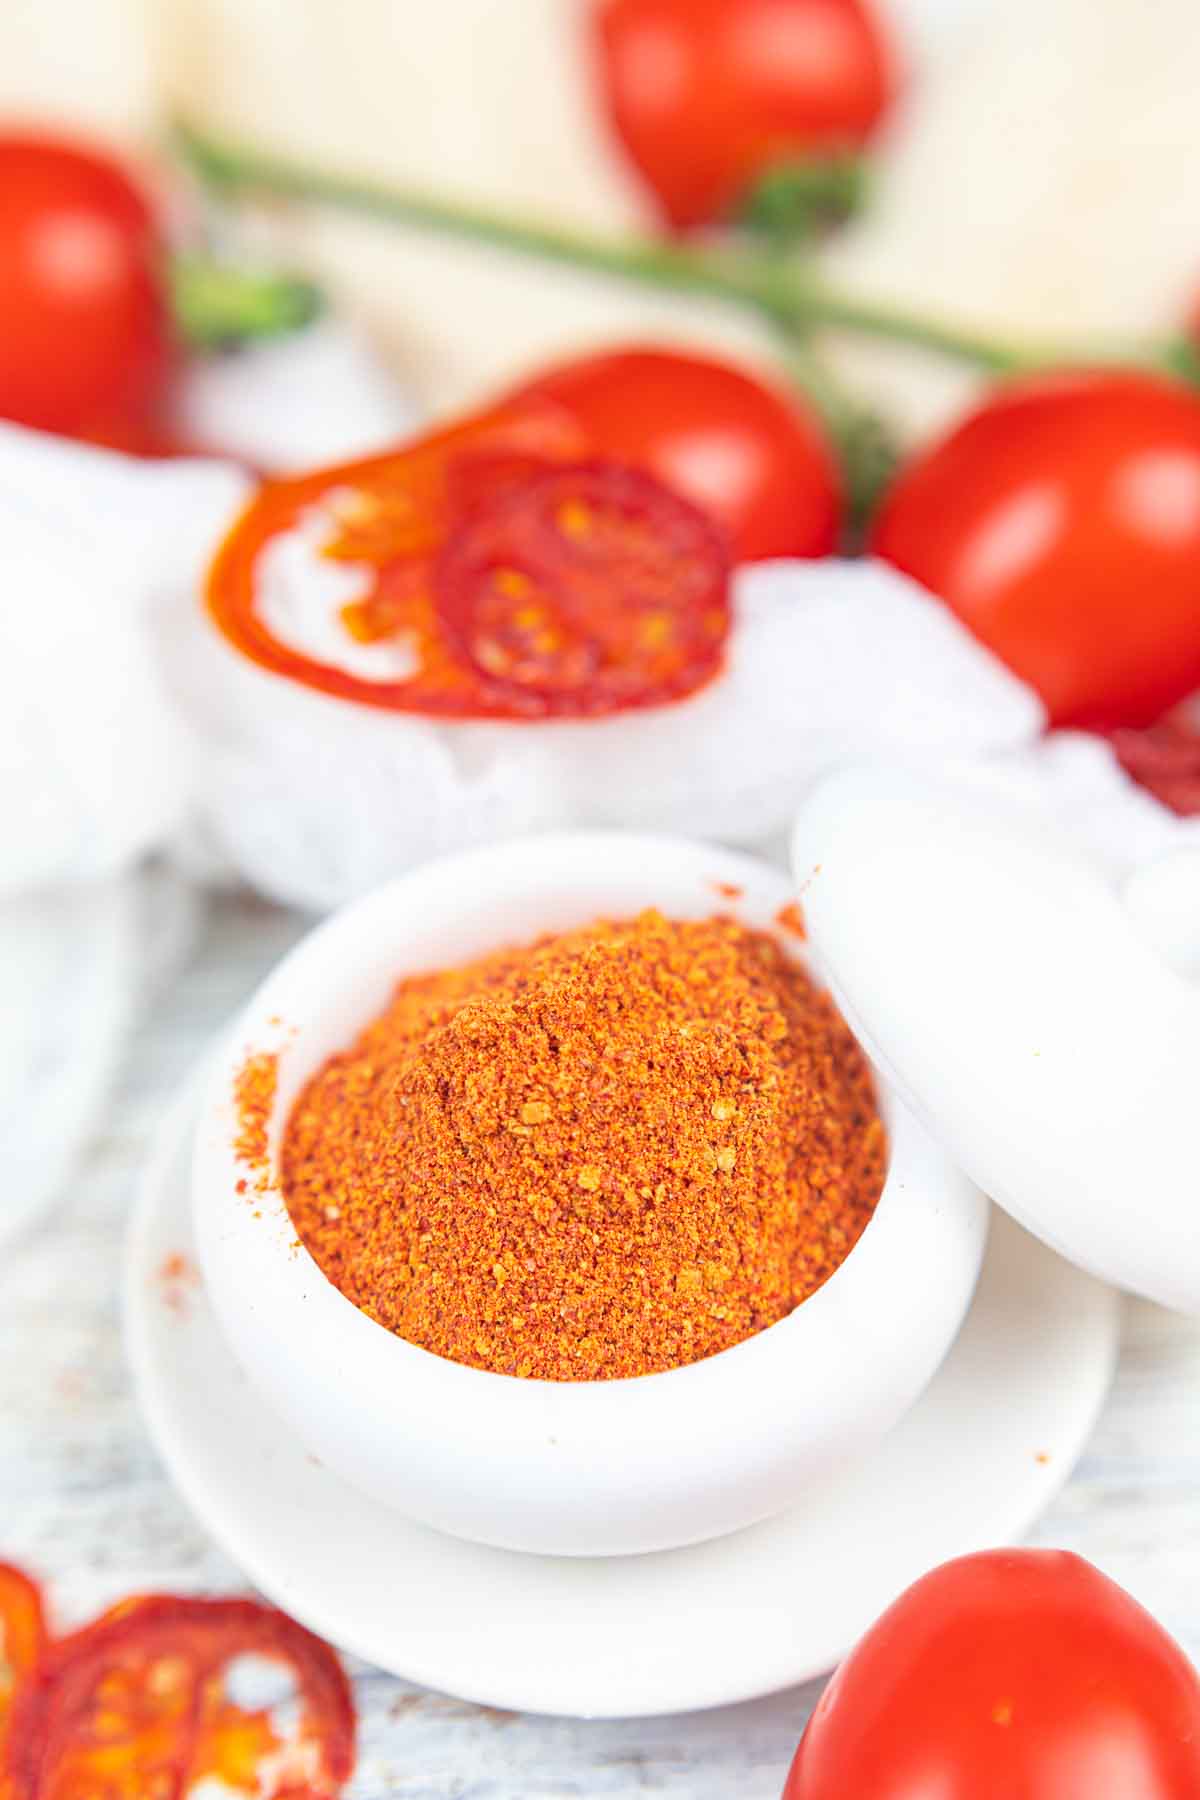 A small white bowl filled with tomato powder, surrounded by fresh whole and sliced tomatoes on a wooden surface.